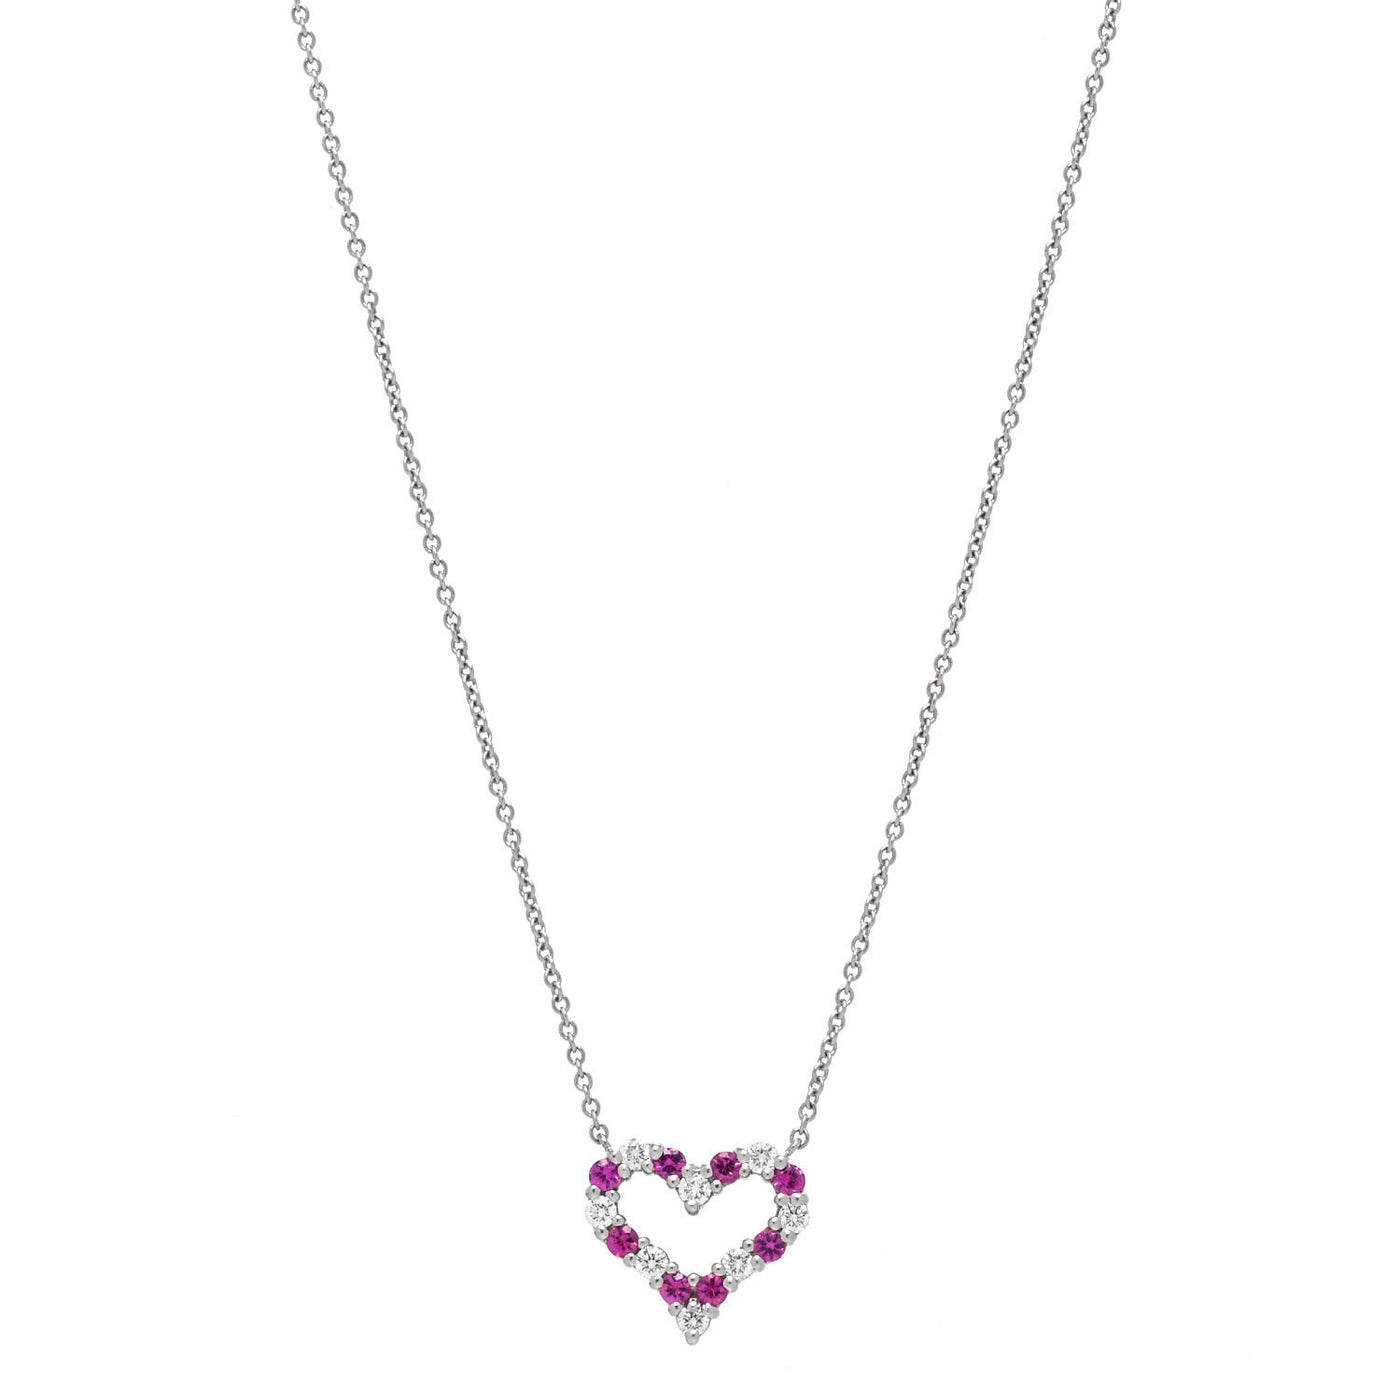 Tiffany & Co. Diamond and Sapphires Heart Necklace in Platinum